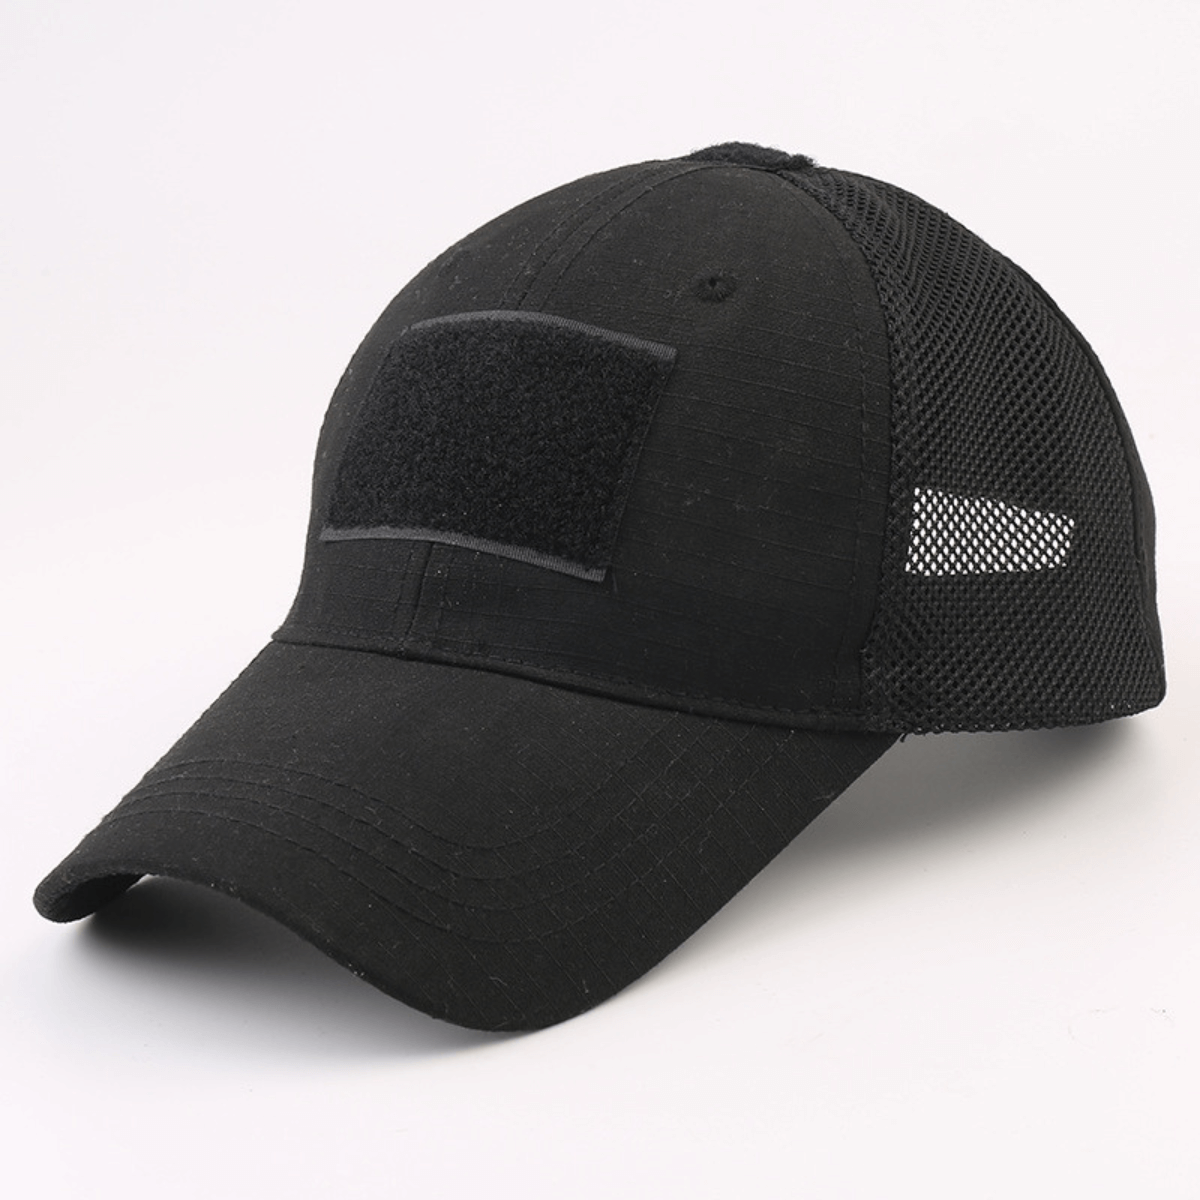 Tactical-Style Patch Hat with Adjustable Strap-15